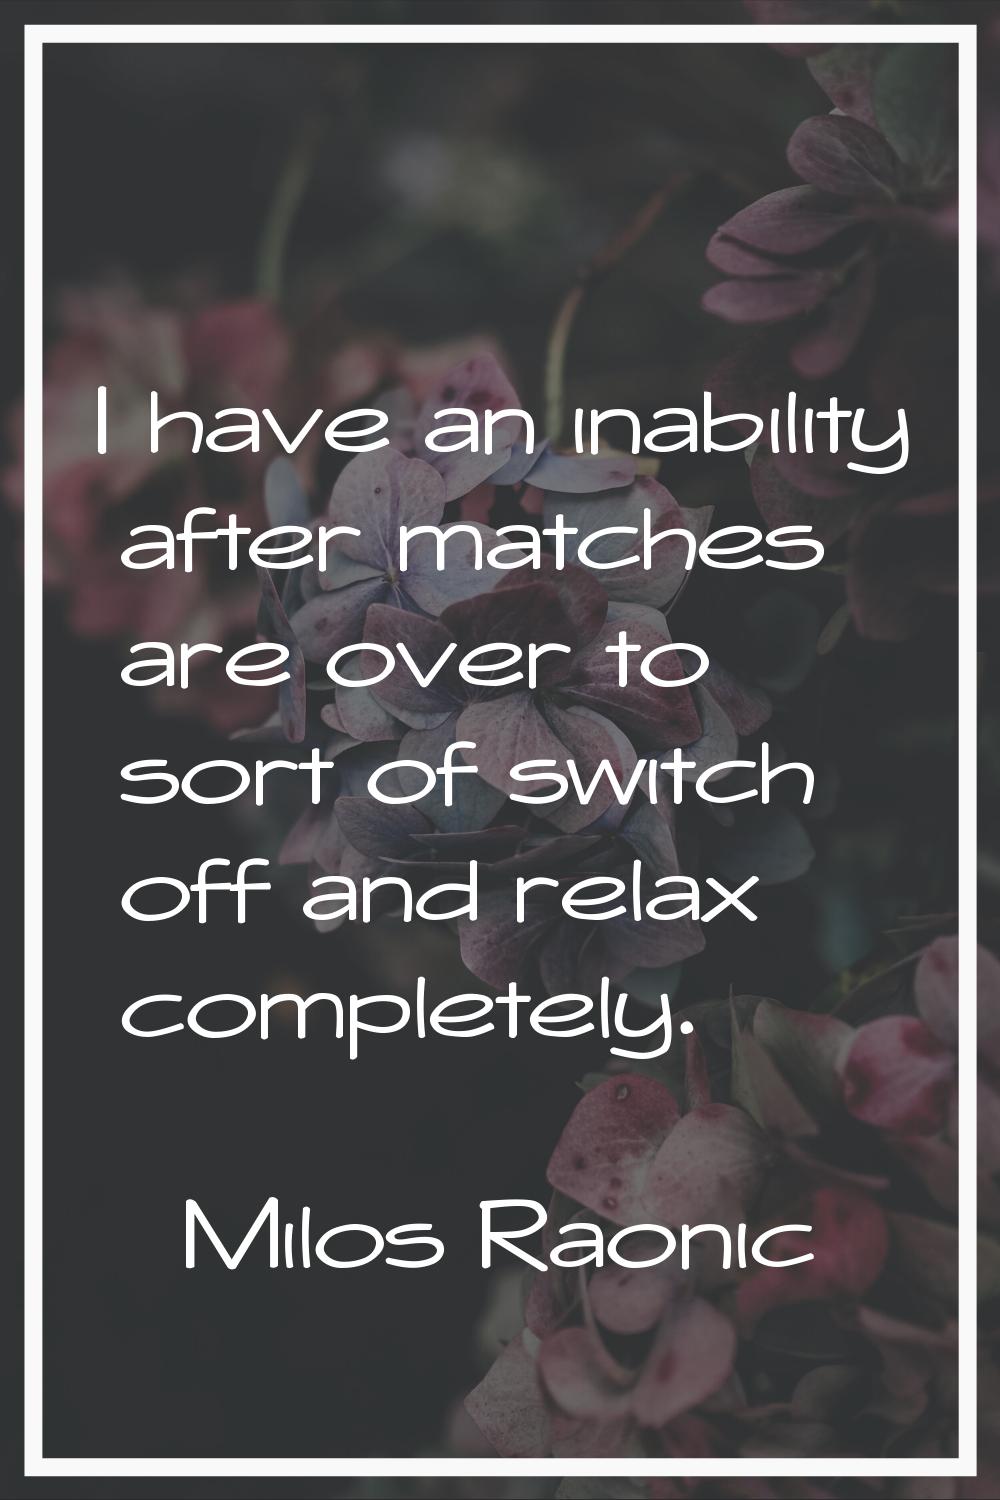 I have an inability after matches are over to sort of switch off and relax completely.